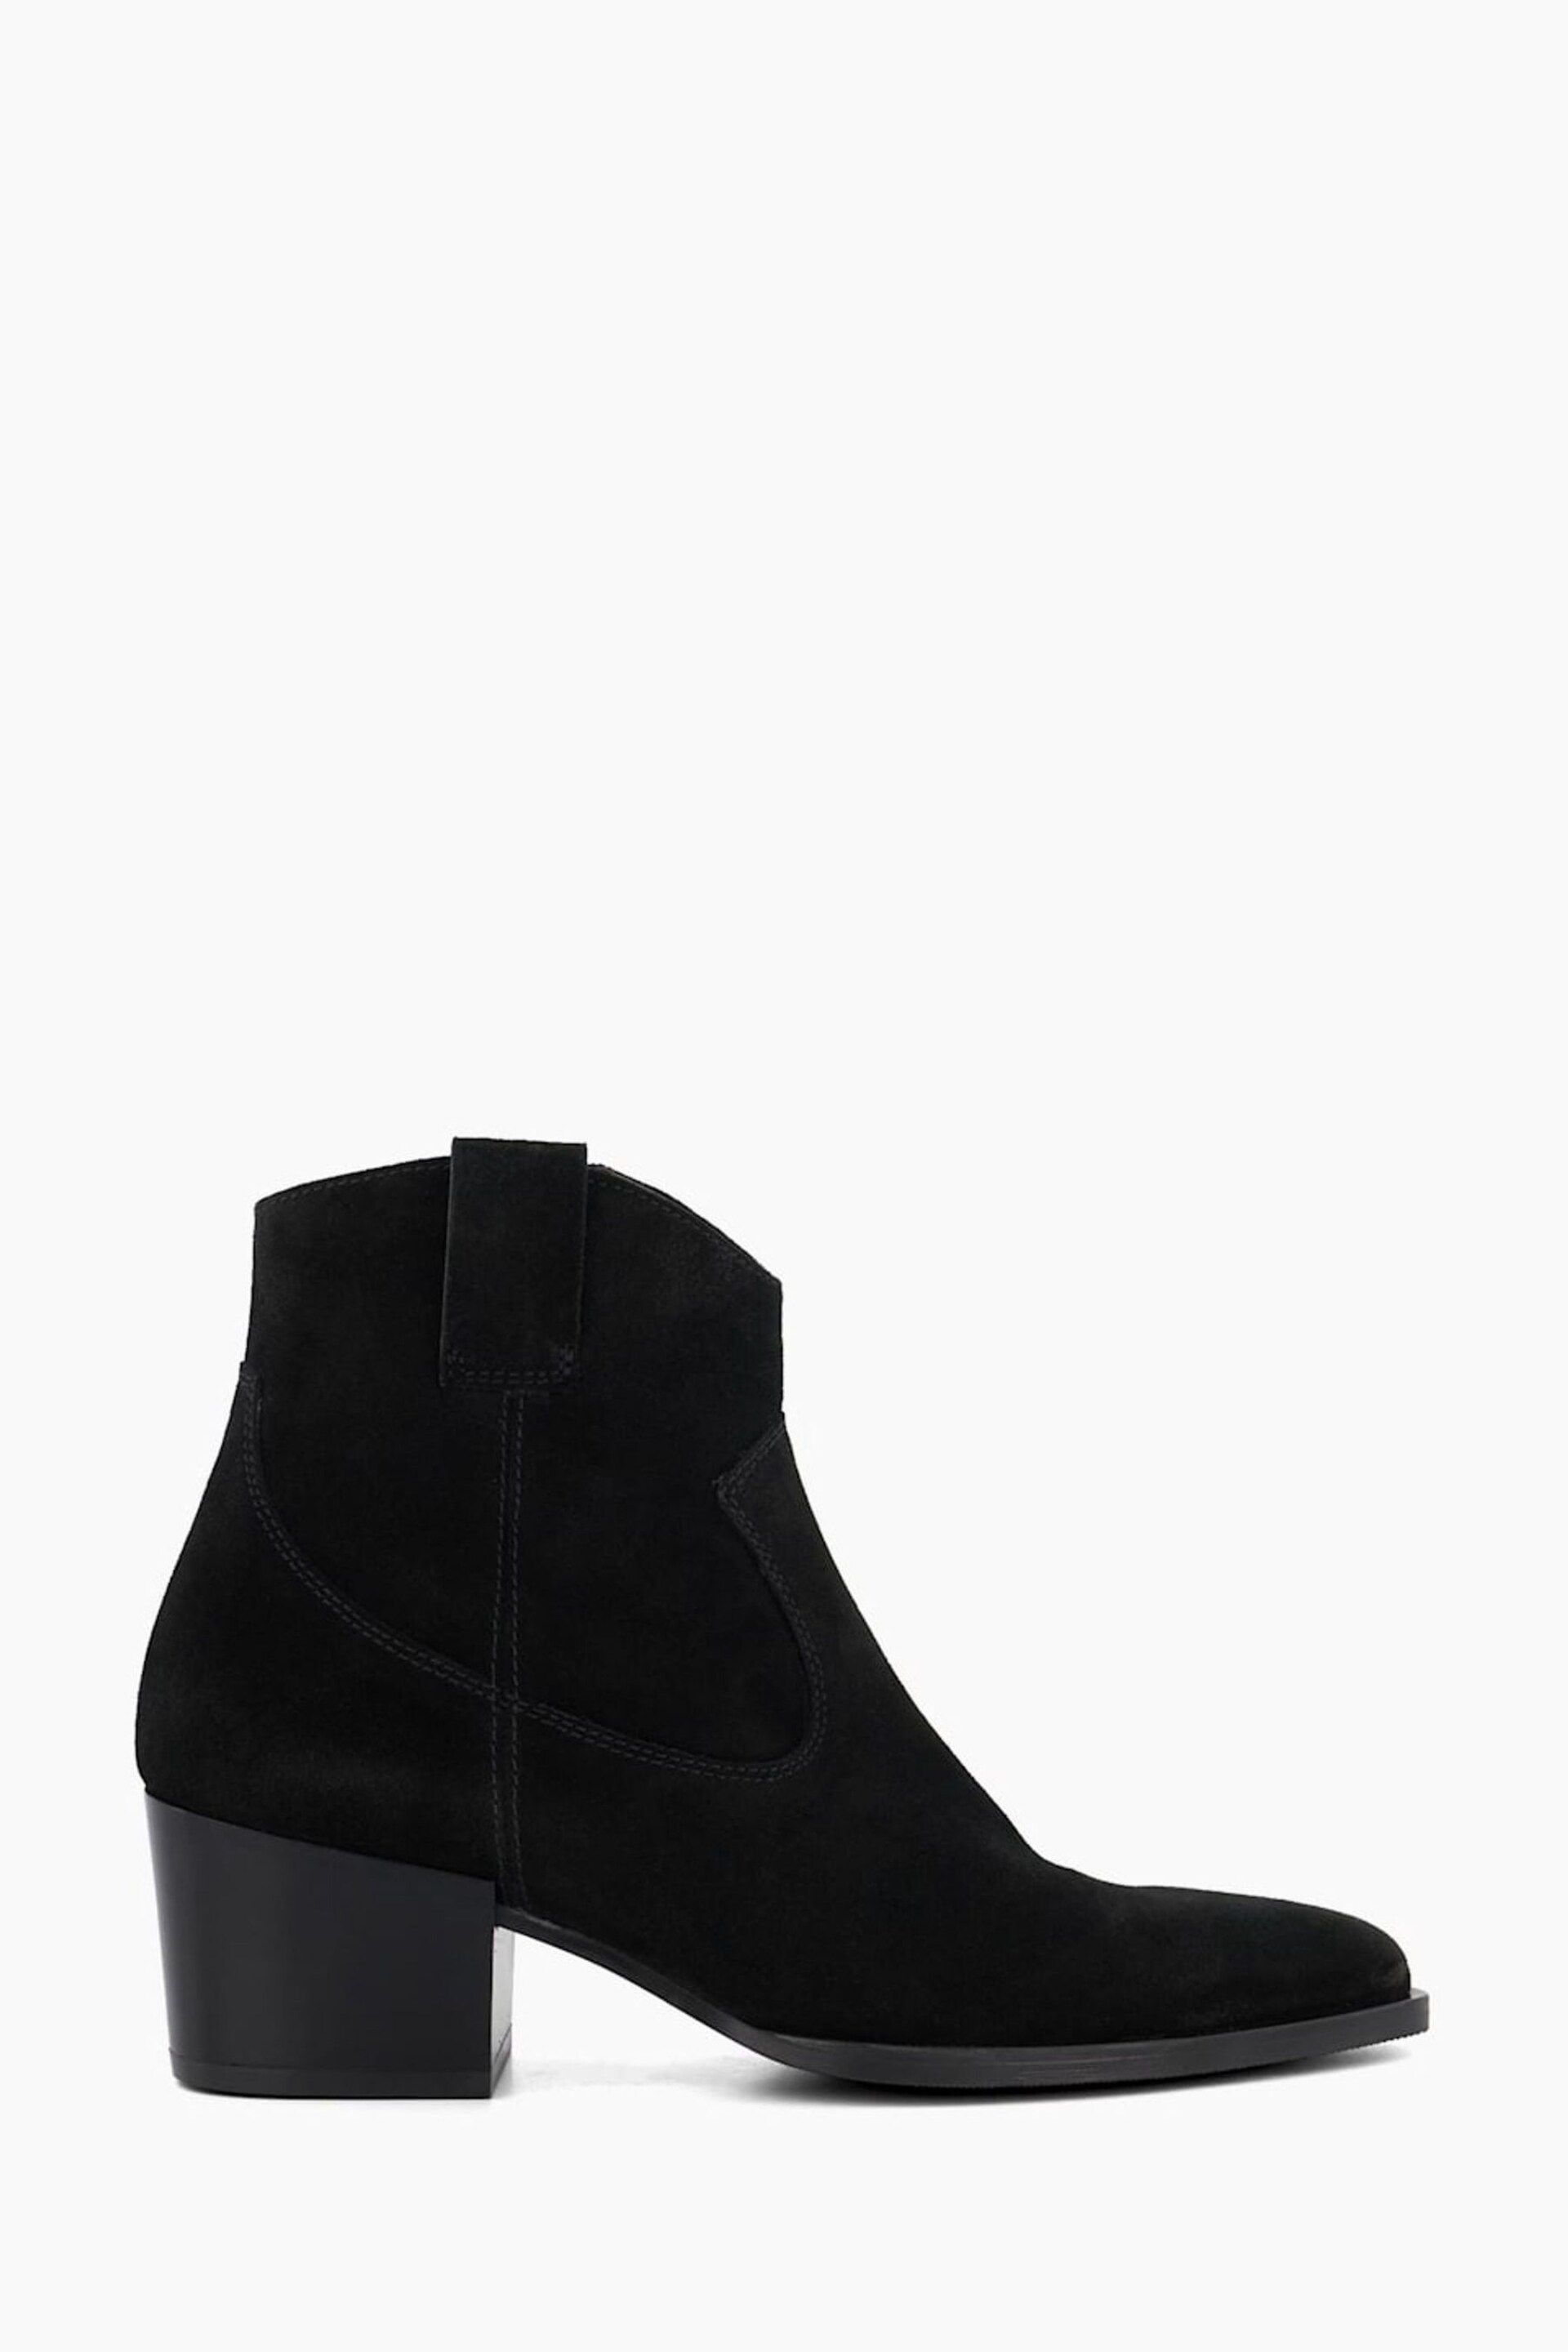 Dune London Black Possible Western Low Boots - Image 1 of 5